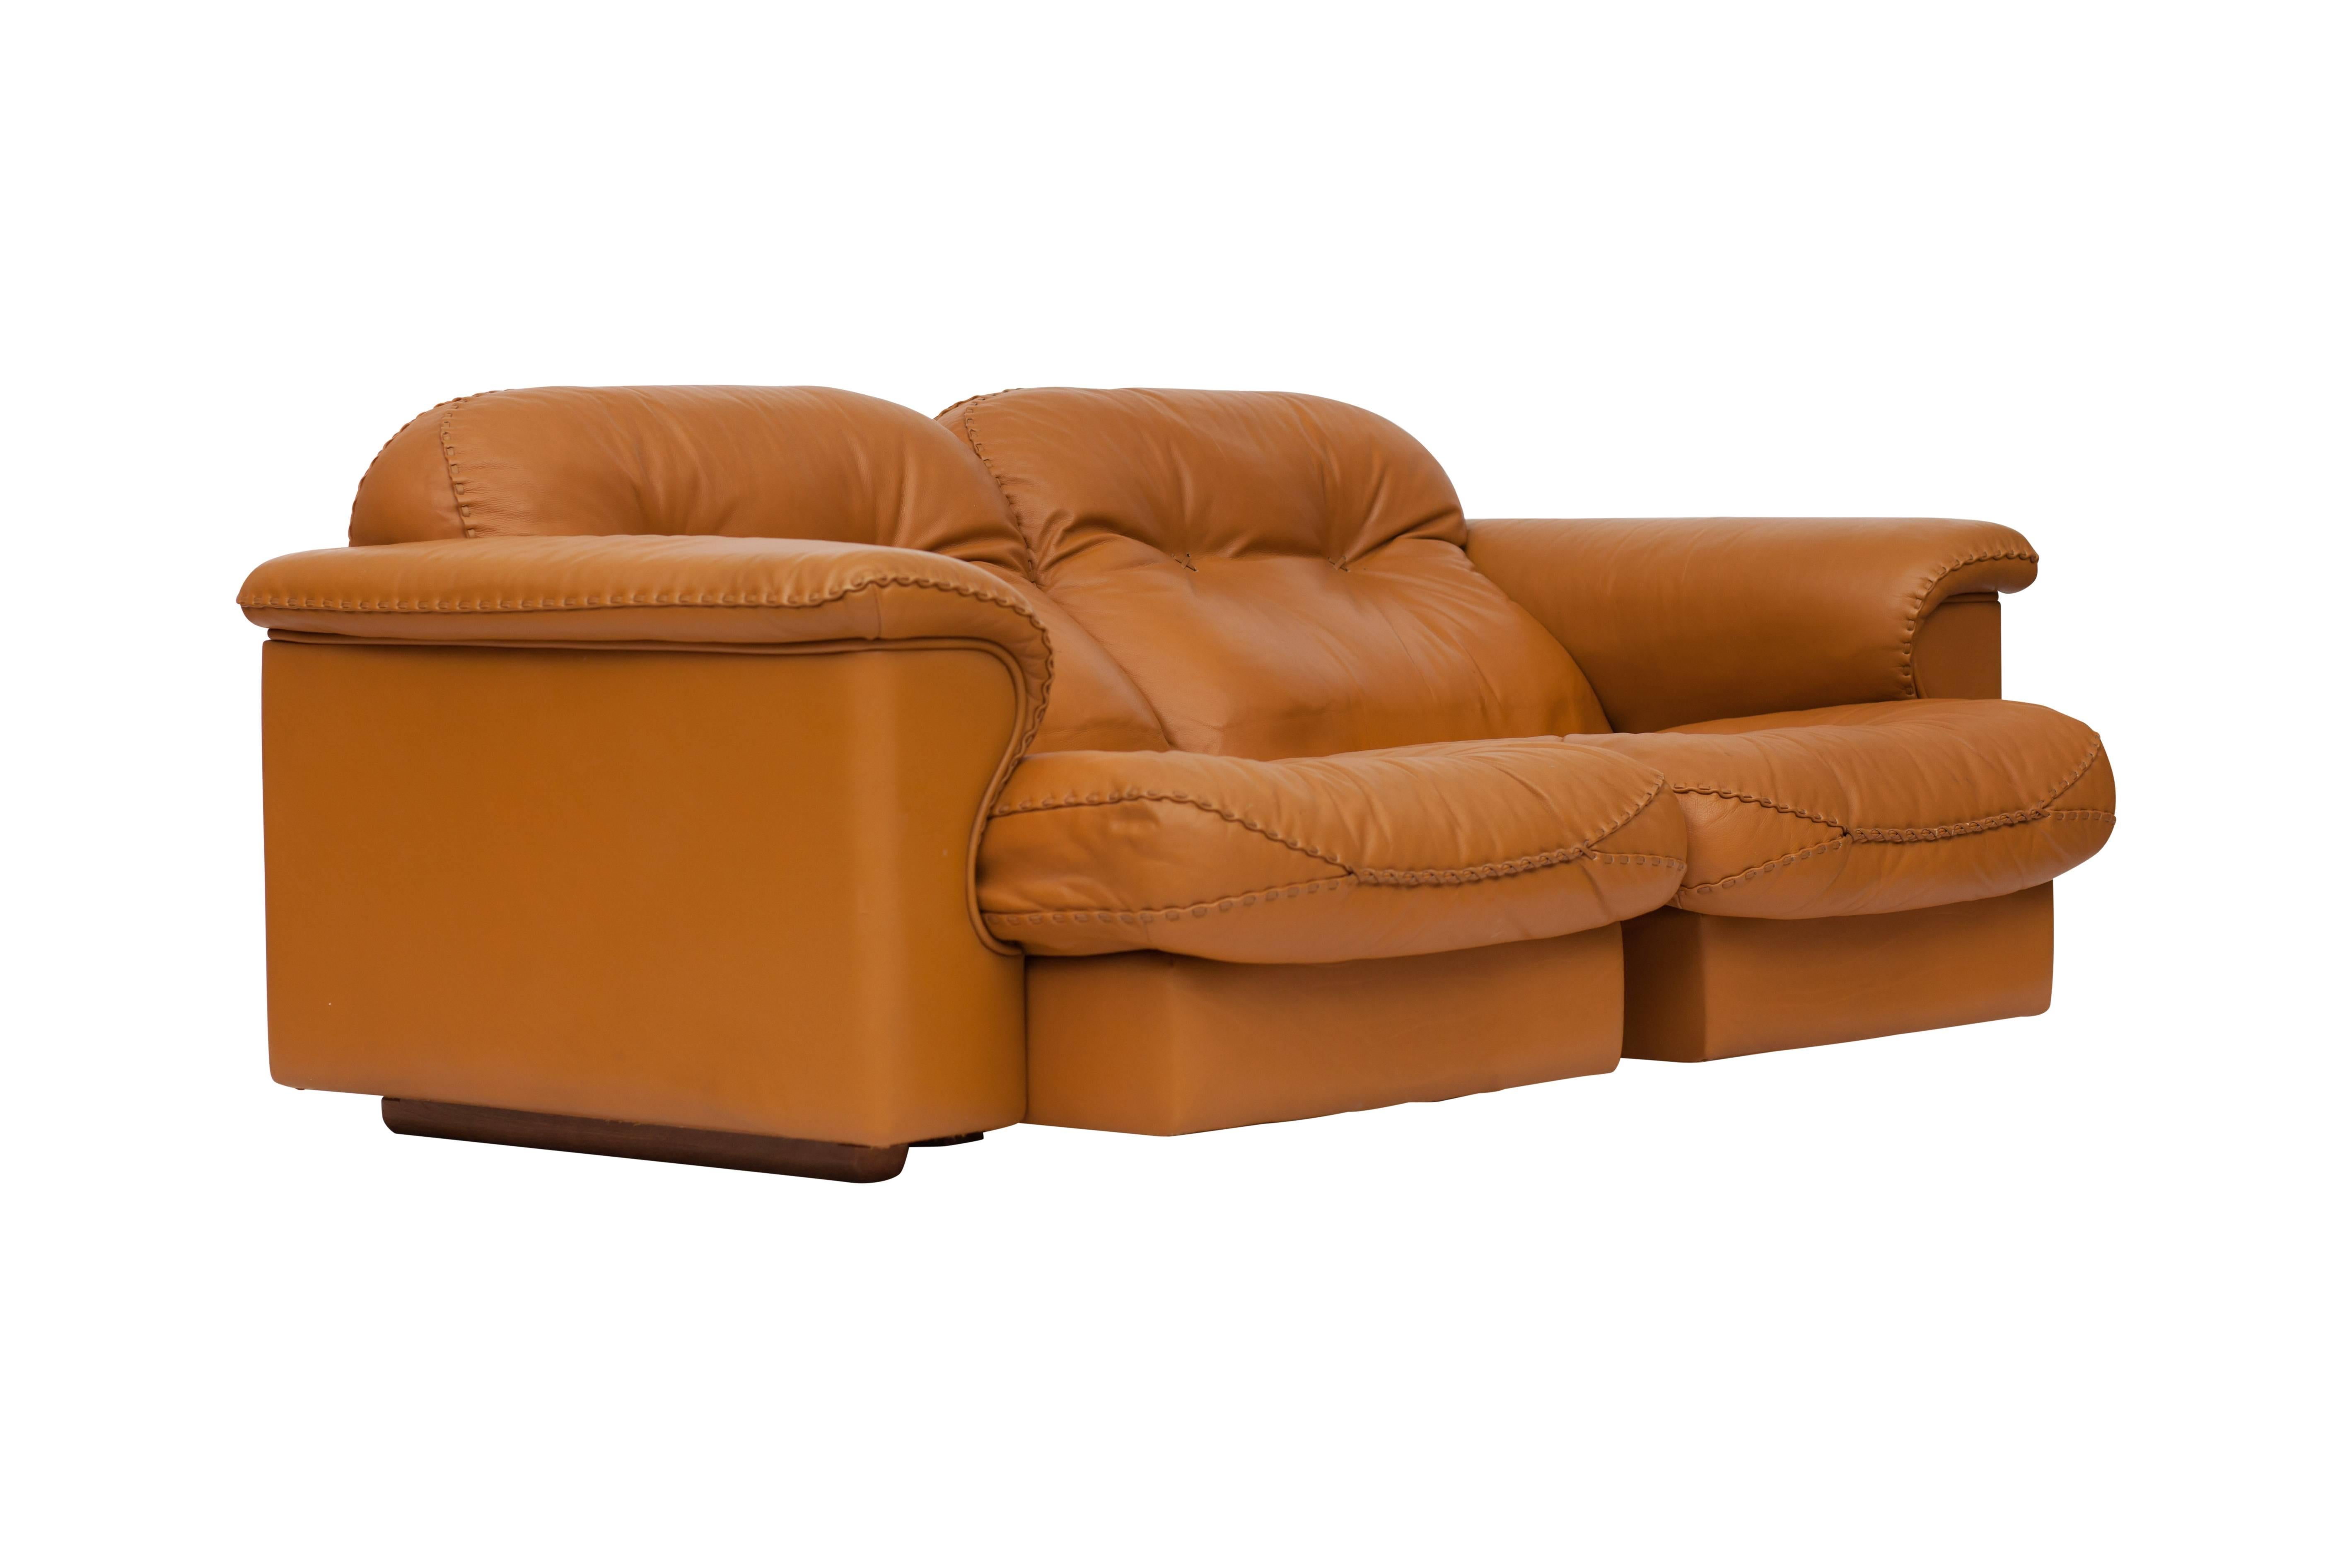 Mid-century modern Adjustable and comfortable two-seater sofa by De Sede.
The sofa is provide with a high quality brown leather and interesting think stitched seams.
The sofa features in a James Bond movie

 
 